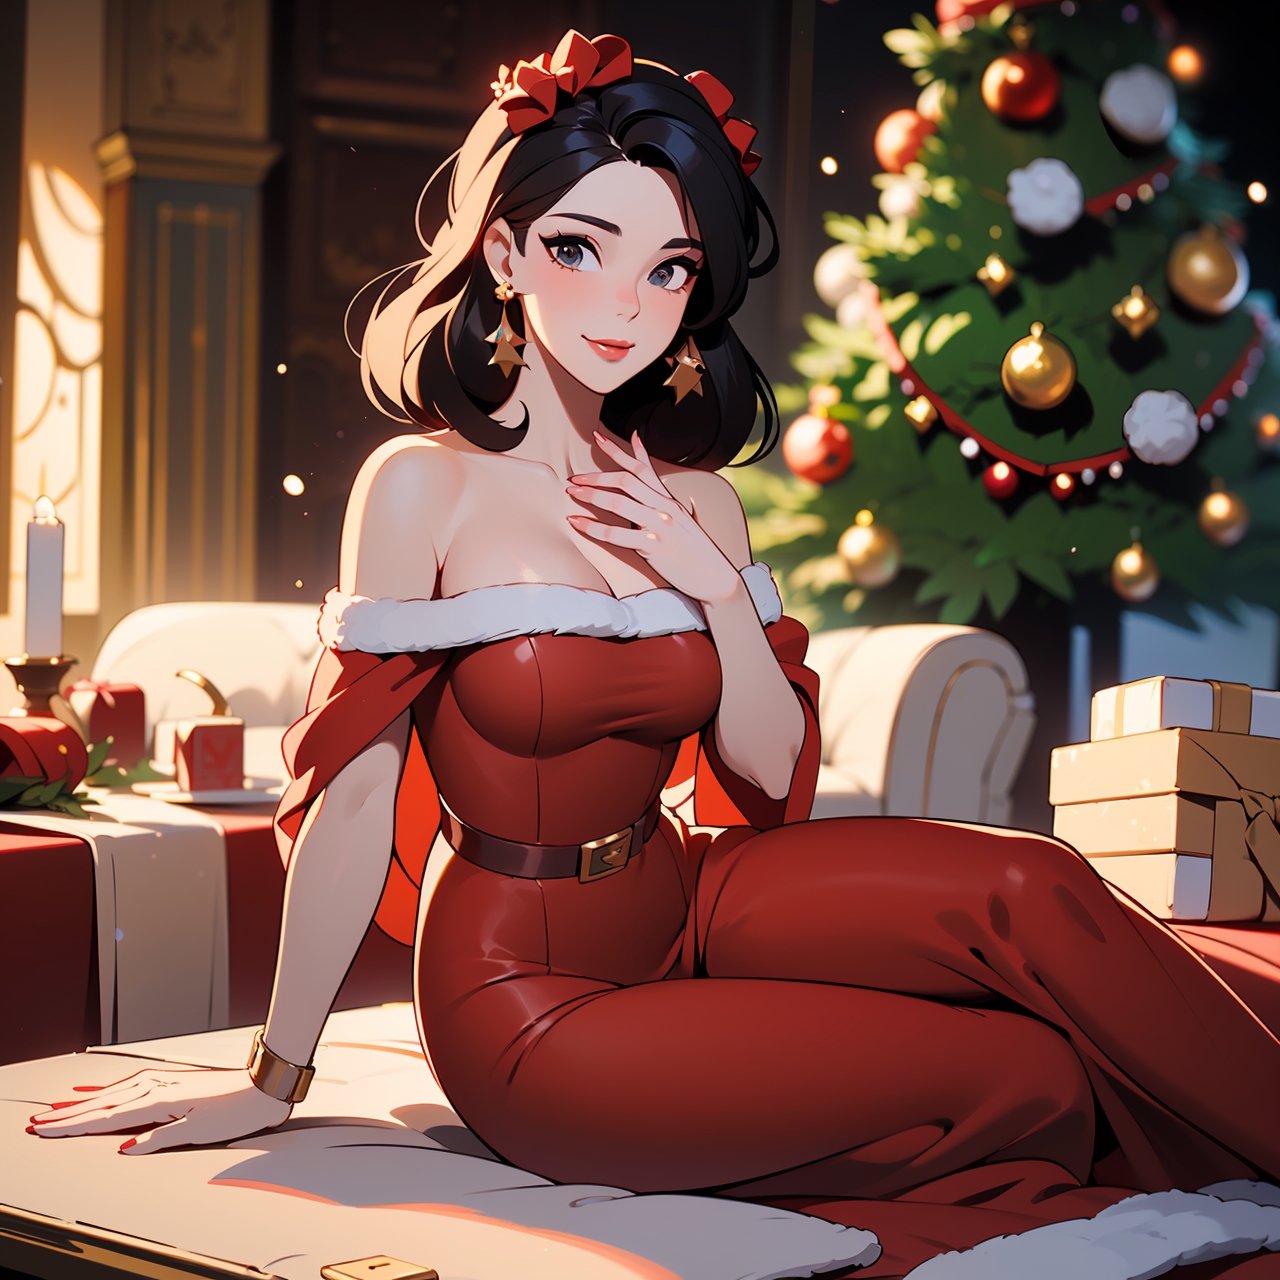 (best quality, masterpiece), 1girl, looking at viewer, blurry background, 1 girl,Santa dress,Christmas scene,

(8k quality), (Best quality), (Ultra HD), (Perfect character anatomy), (perfect lighting), (8k full body photo), (Perfect details), (Perfect character details), (Details of the perfect setting), (Masterpiece), (Symmetry of the perfect character's face),(Construction of the body of the delicate woman character), ((full body shot)), Beautiful Mrs. Claus, Wearing Beautiful ((Sexy red one-piece Dress)), hourglass figure, sexy pose, seductive, Sitting Near Christmas tree and candy table,